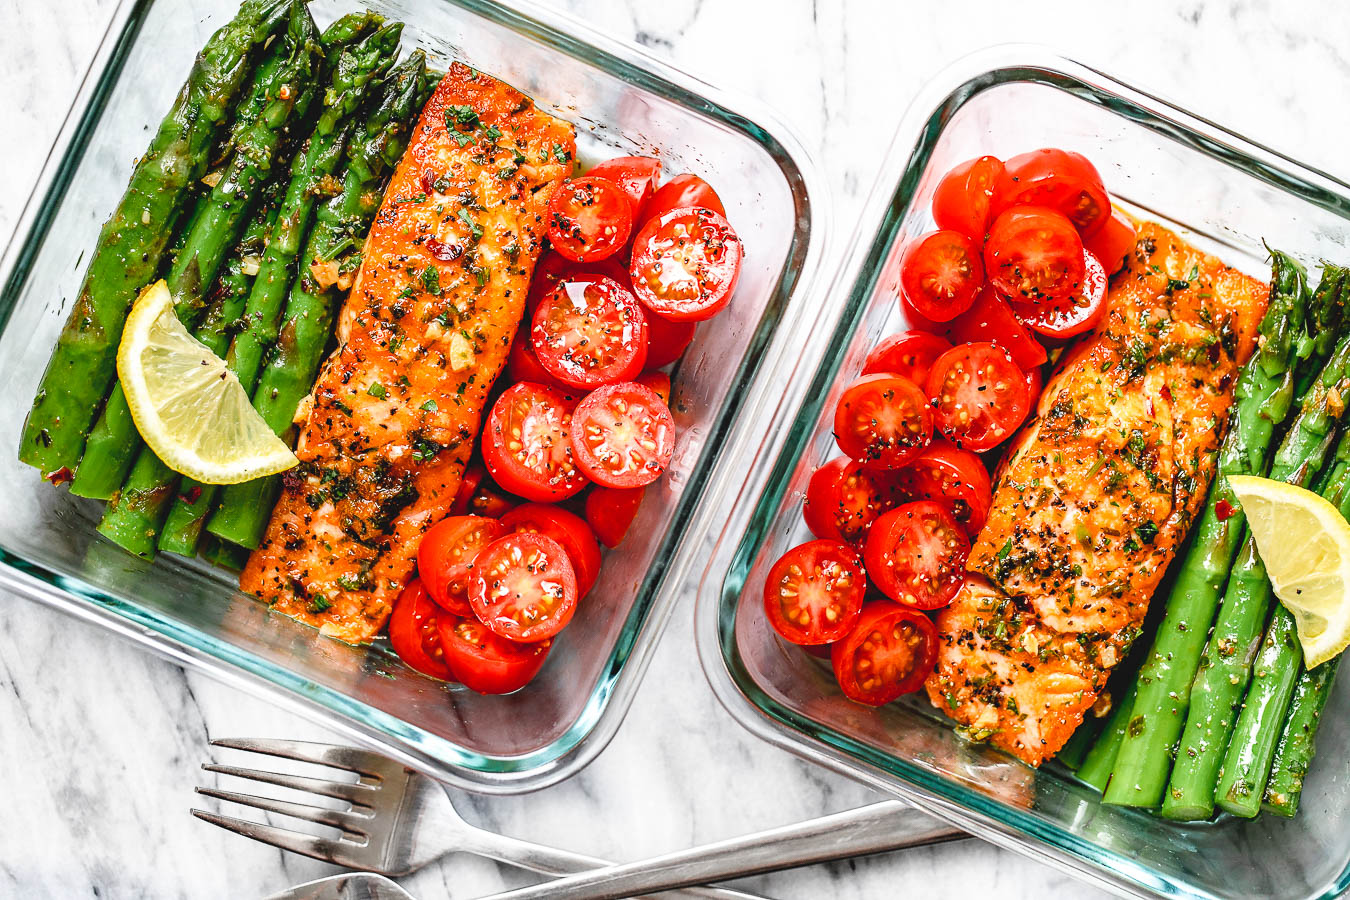 7 Healthy Meal Prep Recipes That Make Life SO Much Easier